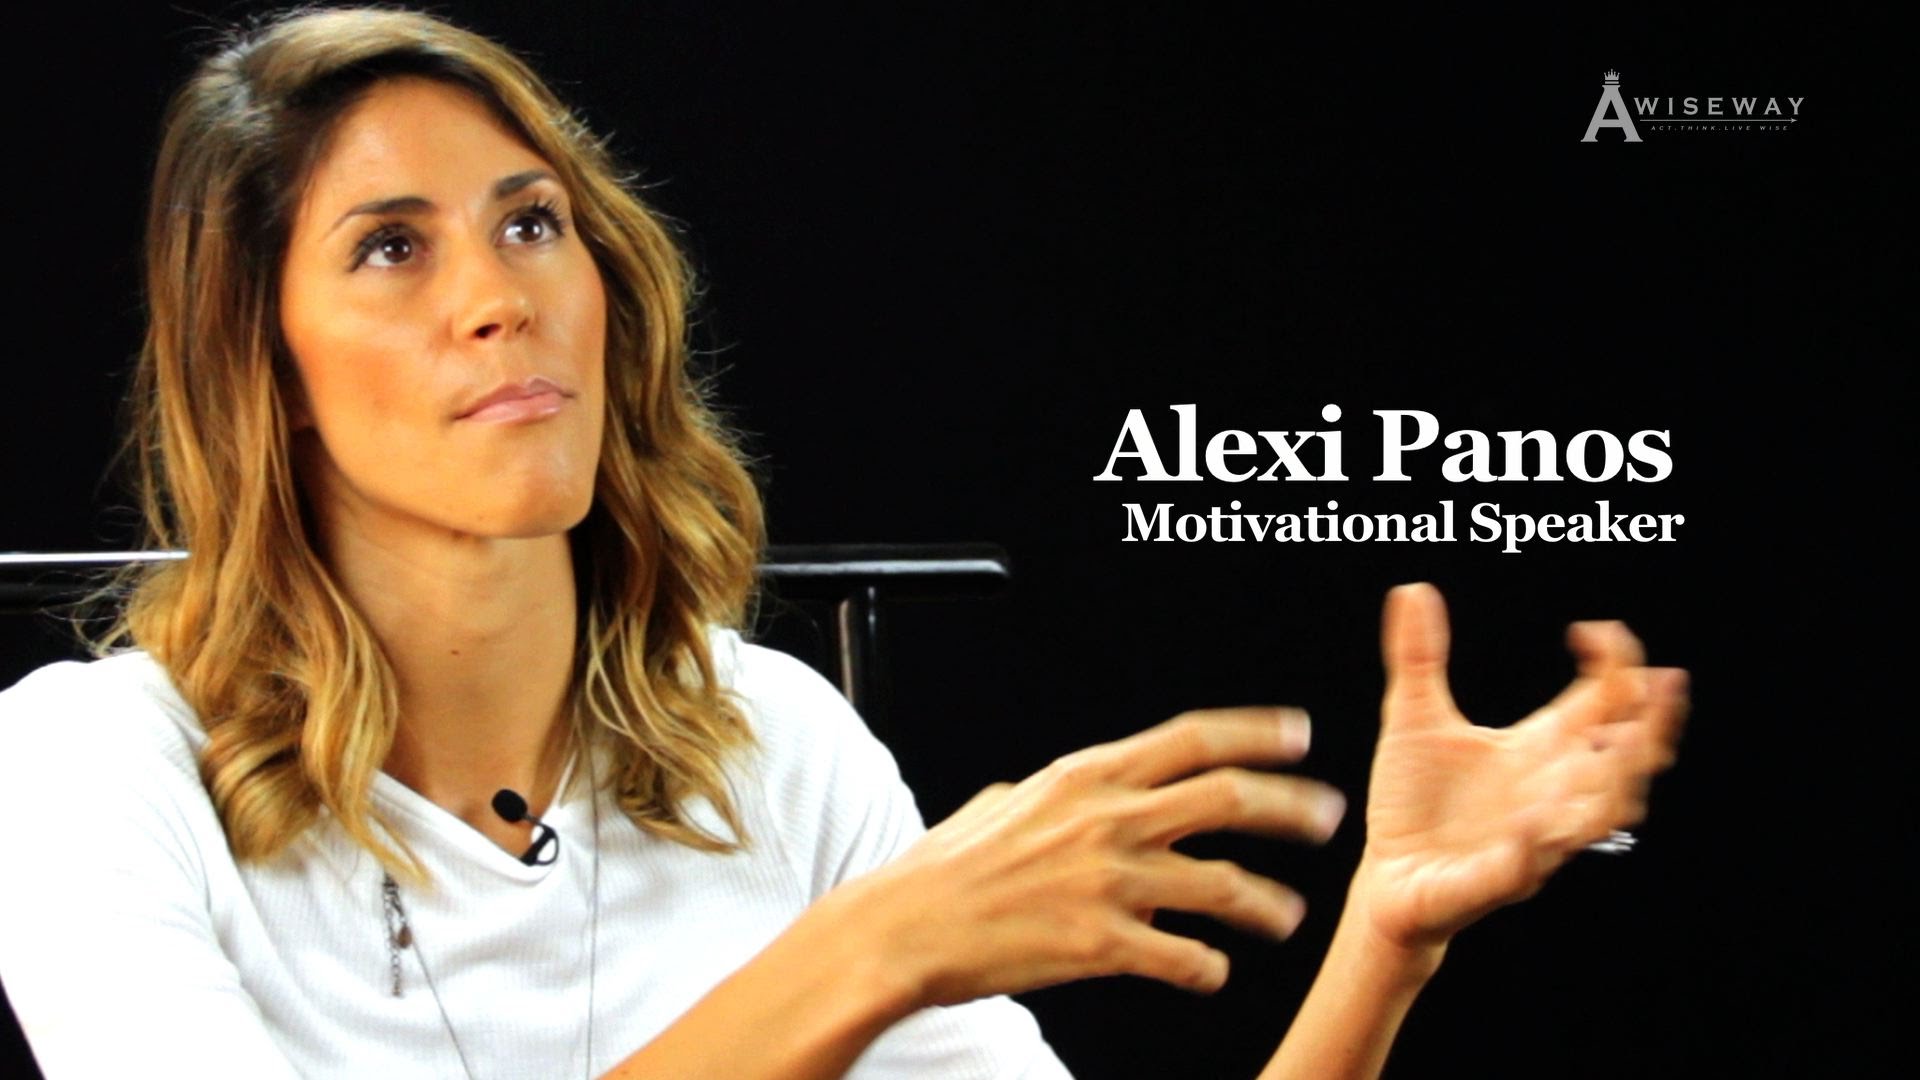 Alexi Panos Shares Her Powerful Story on Inspiring Others